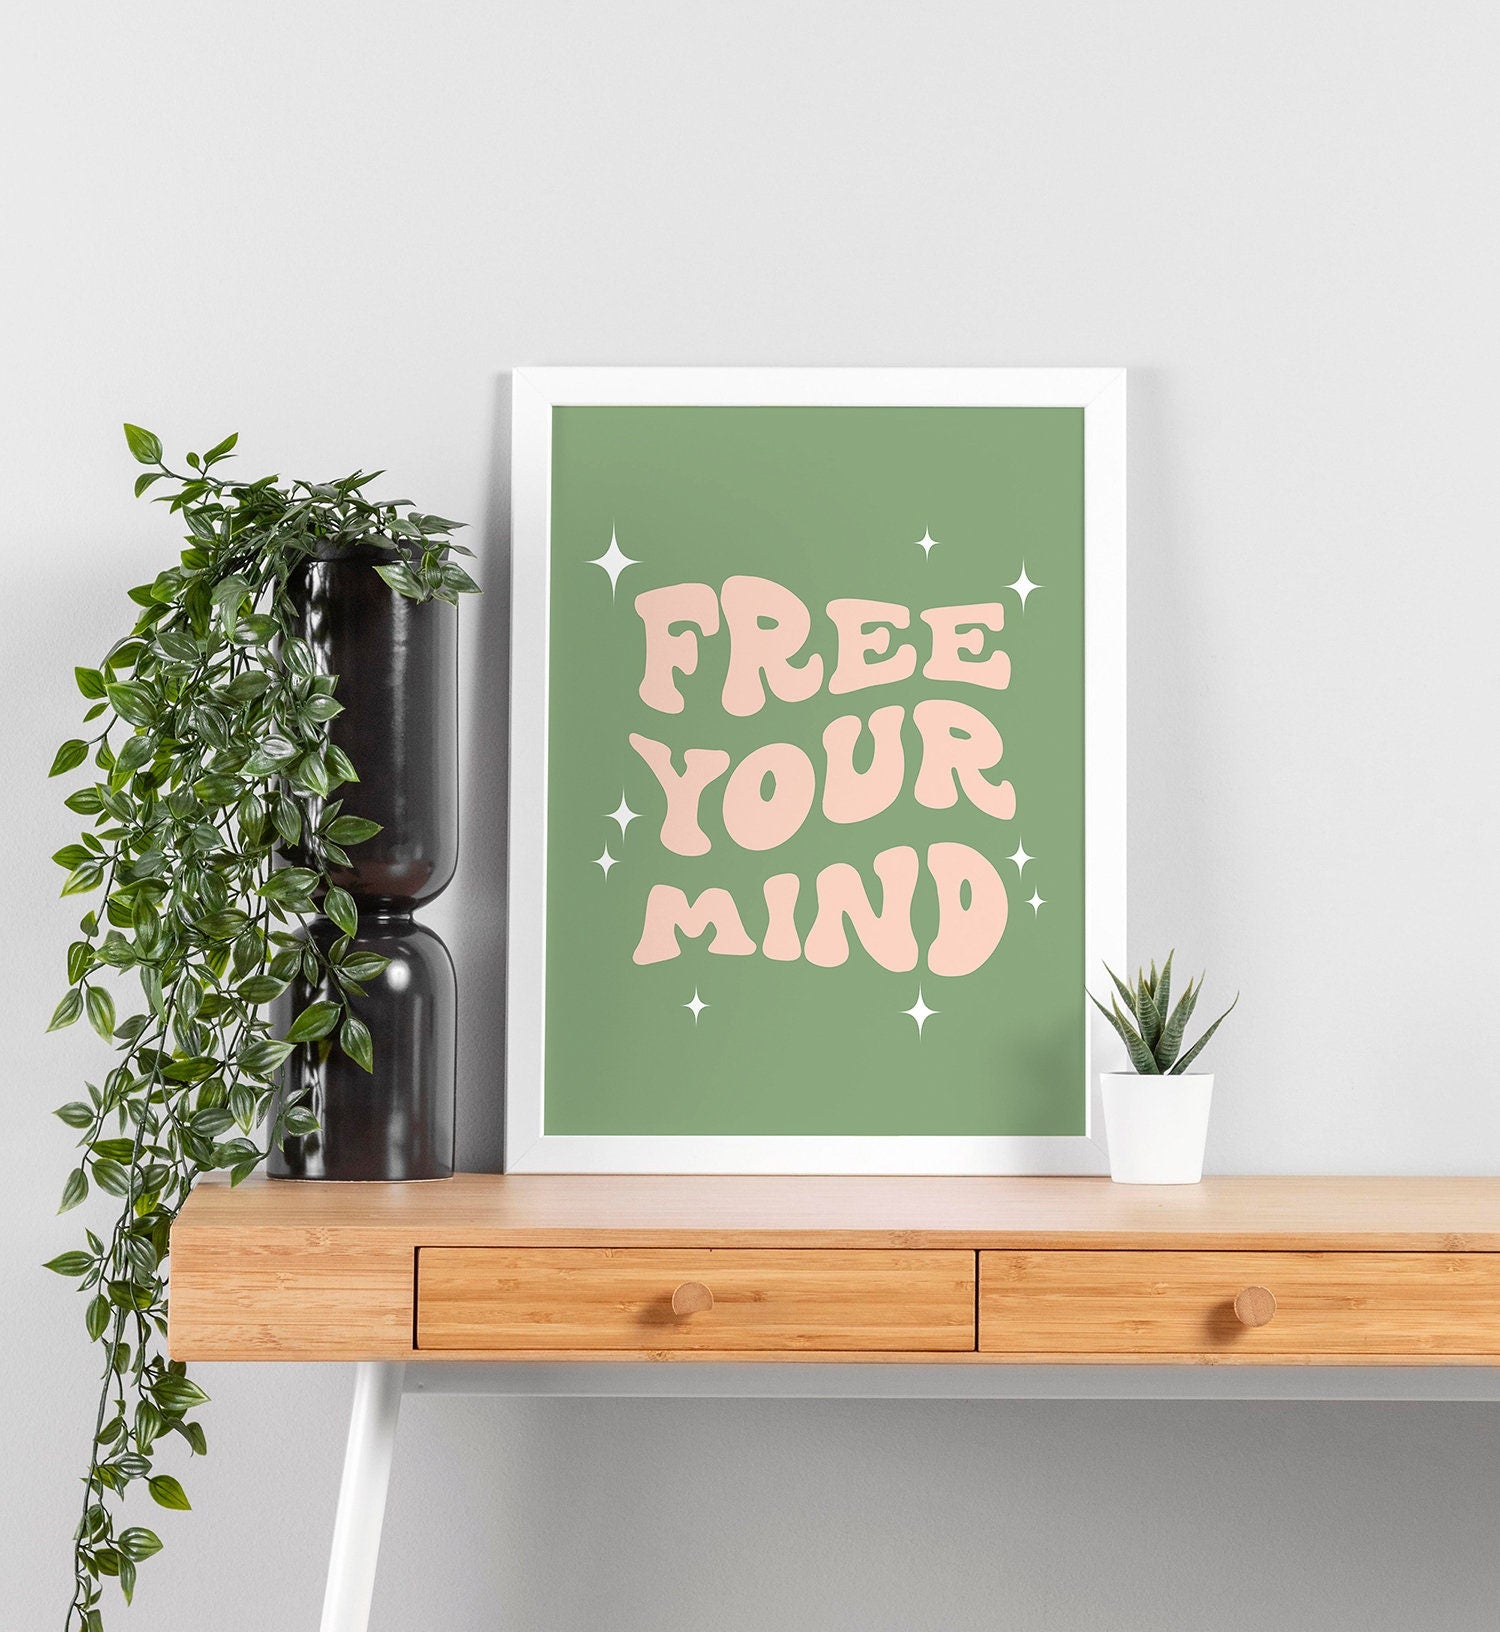 Free Your Mind Poster - shopartivo